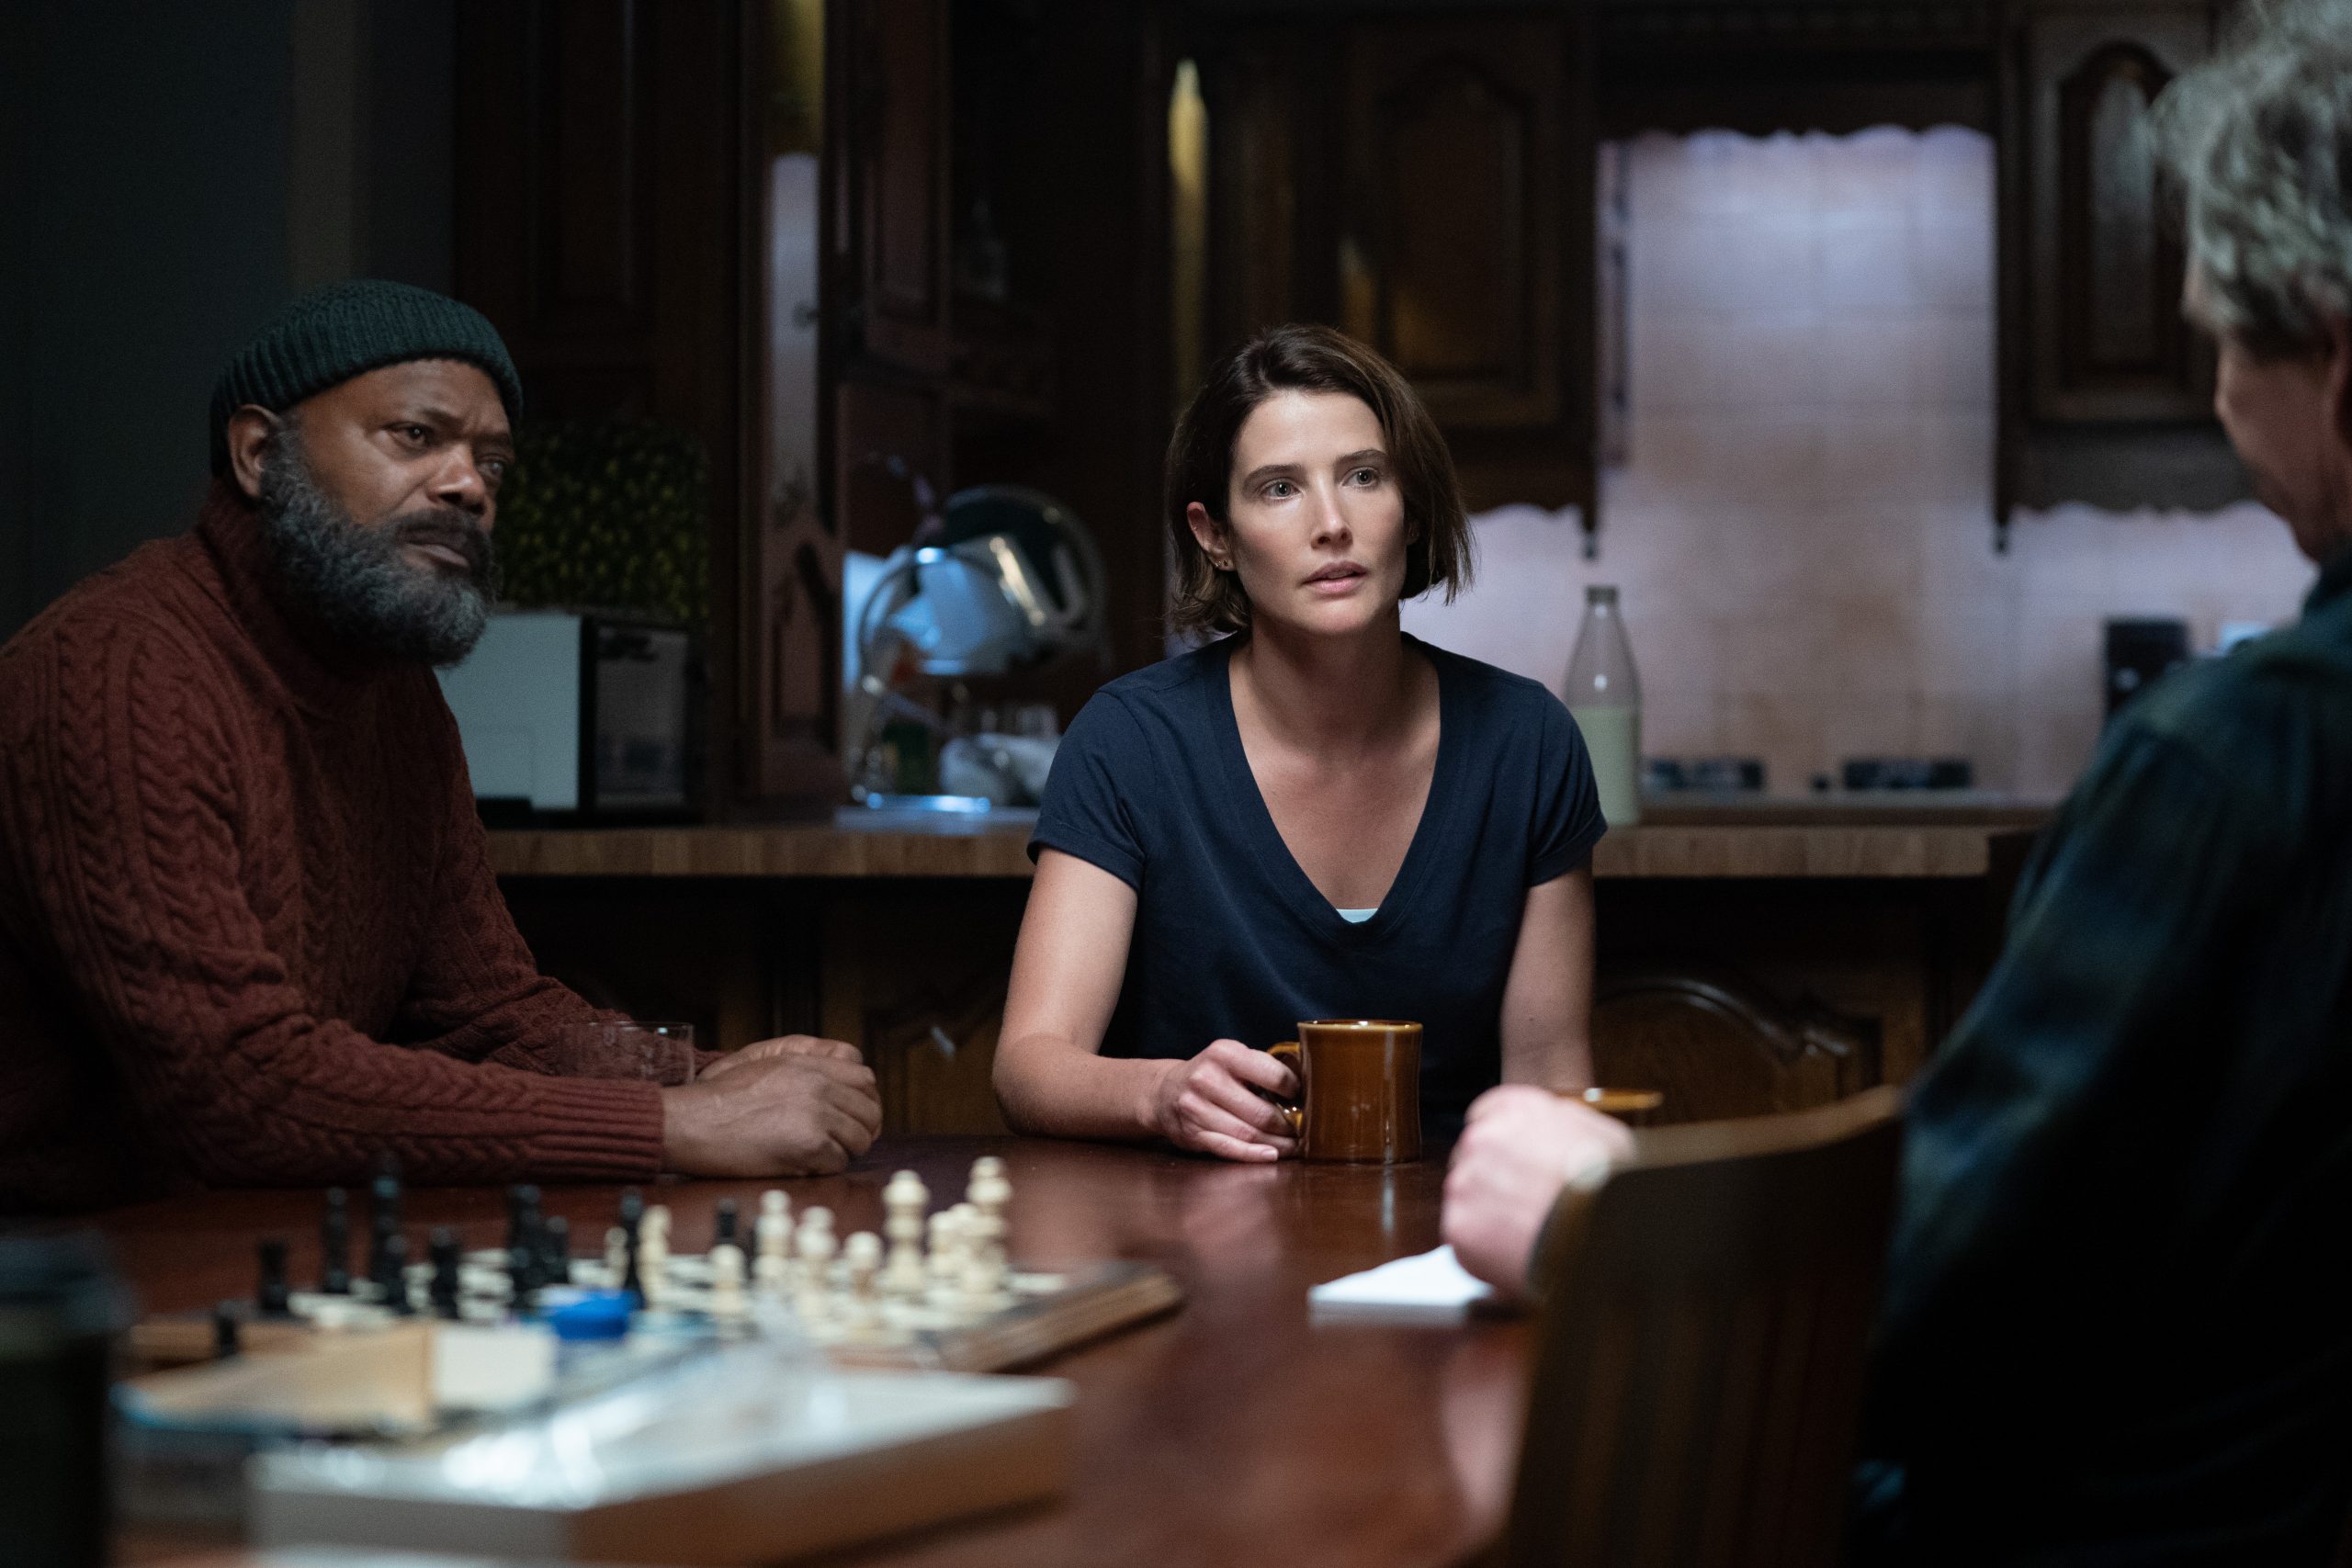 (L-R): Samuel L. Jackson as Nick Fury and Cobie Smulders as Maria Hill in Marvel Studios' SECRET INVASION, exclusively on Disney+. Photo by Gareth Gatrell. © 2023 MARVEL.